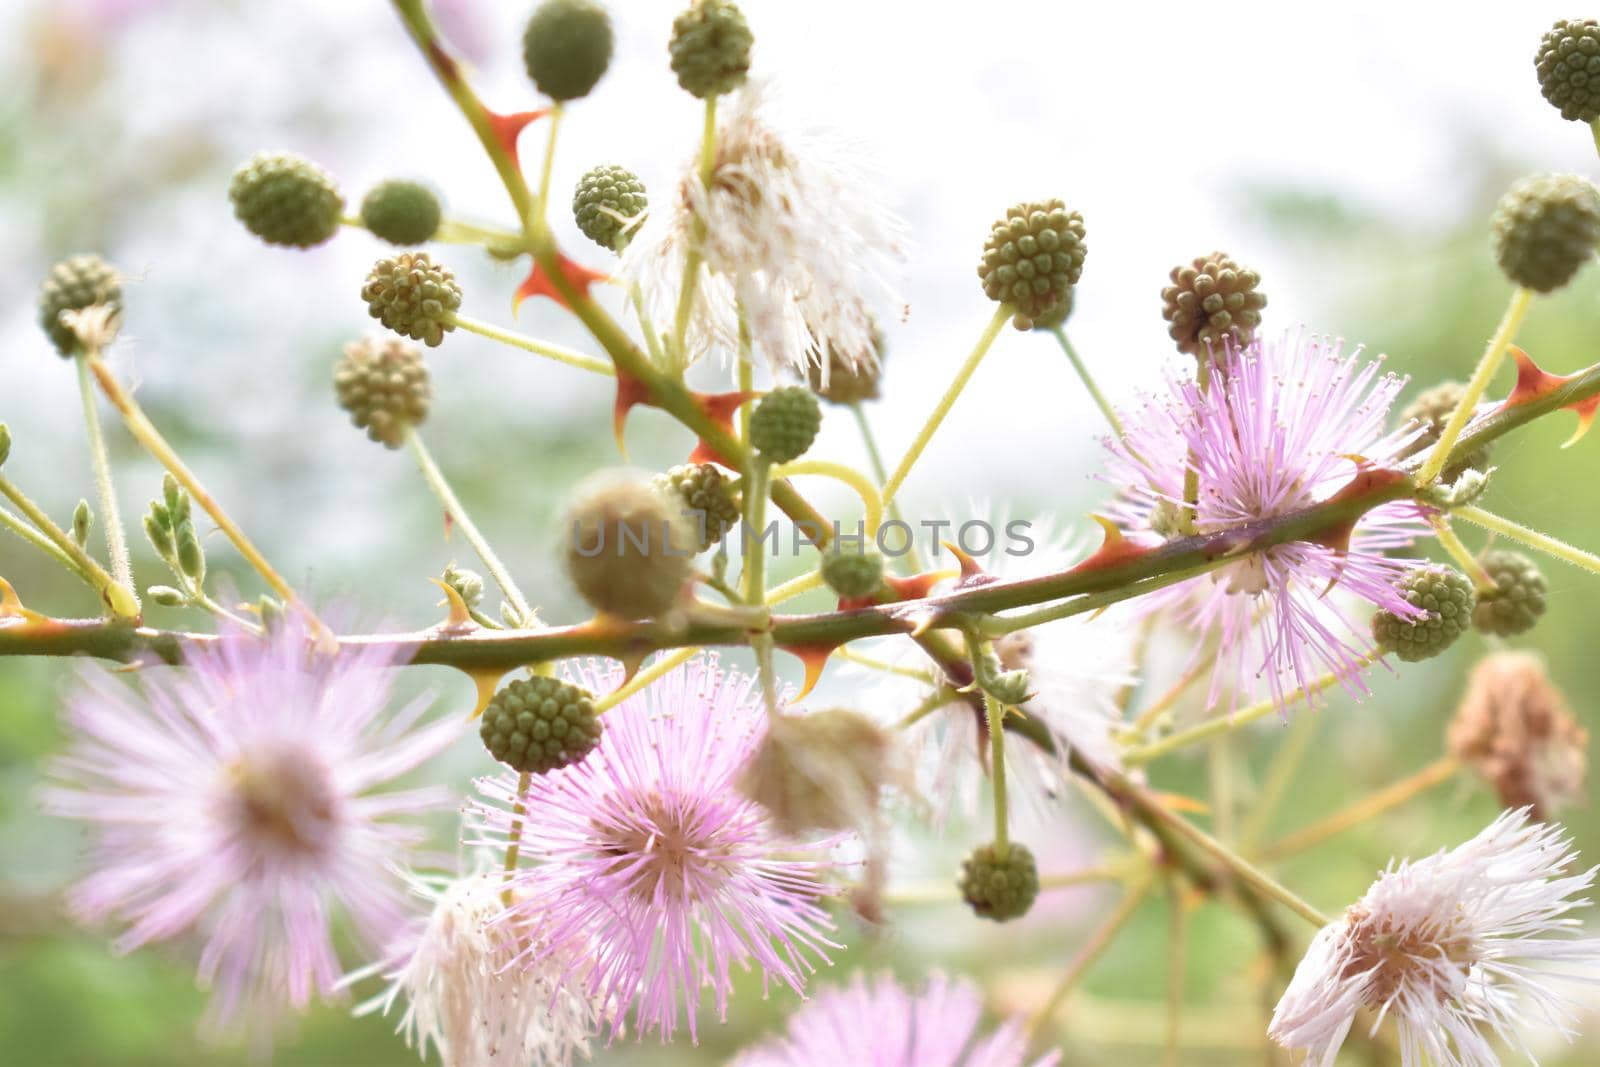 Mimosa pudica, also called sensitive plant, sleepy plant, action plant, touch-me-not,